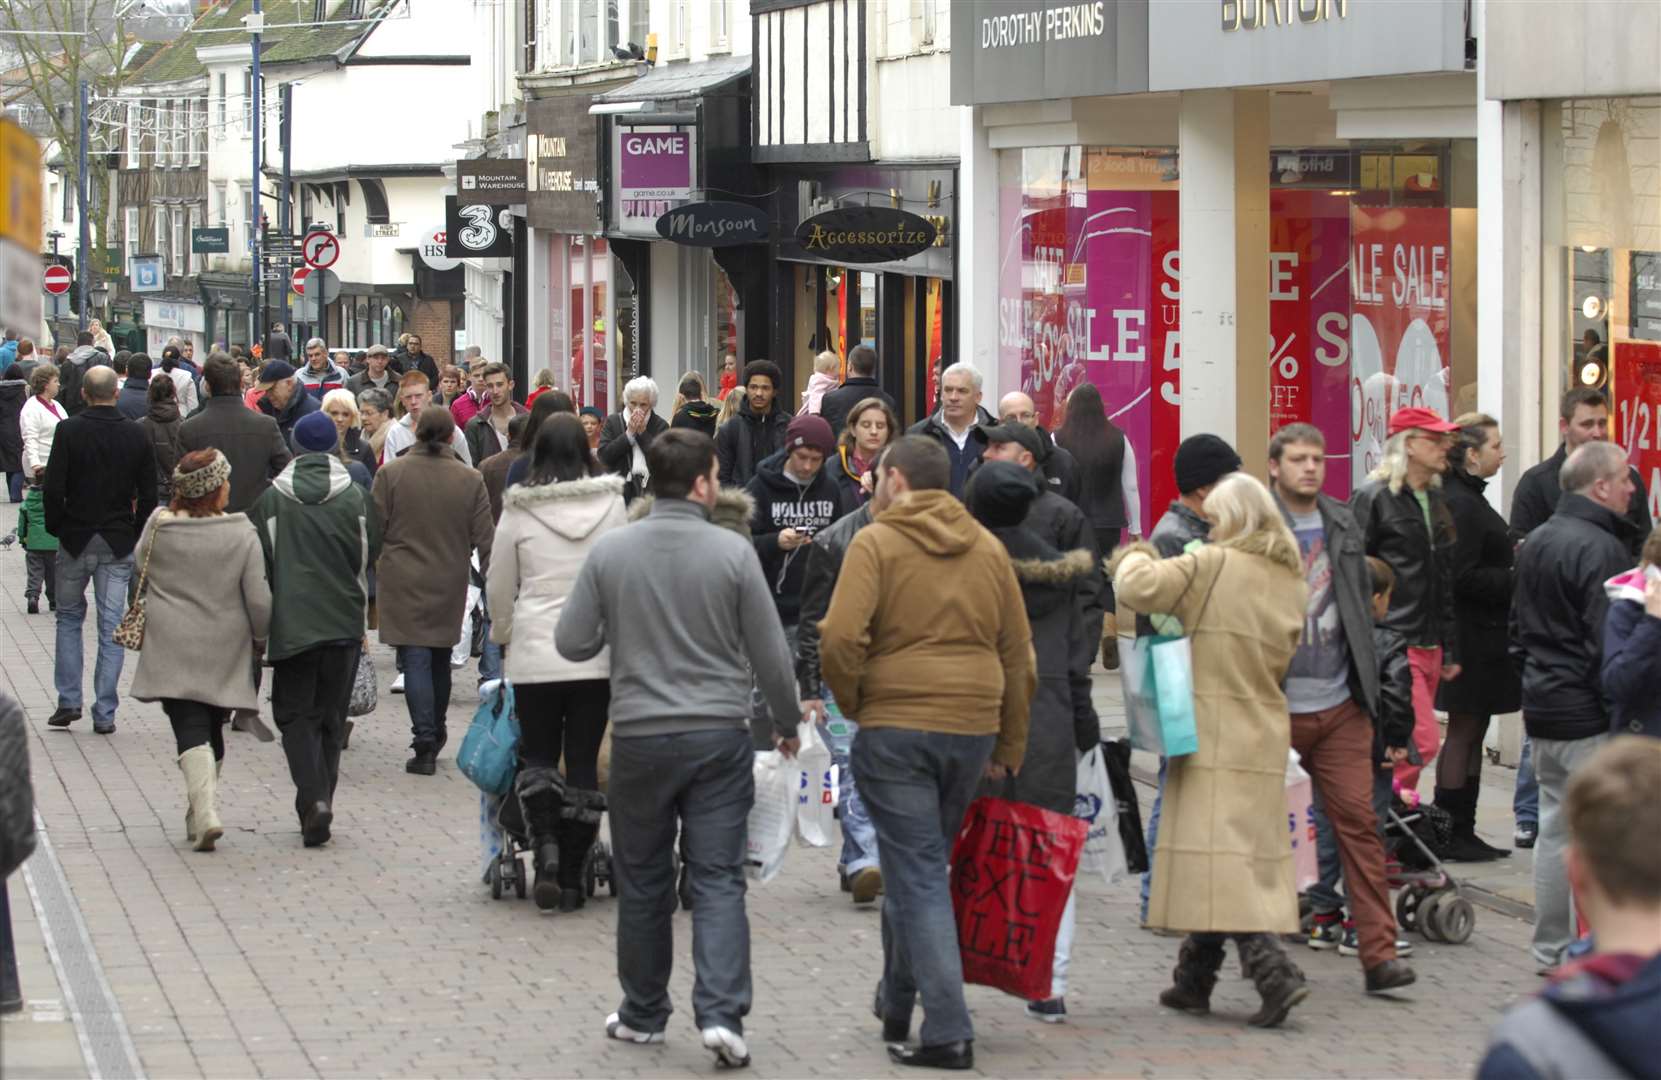 The borough council has announced measures to support Maidstone businesses. Picture: Martin Apps